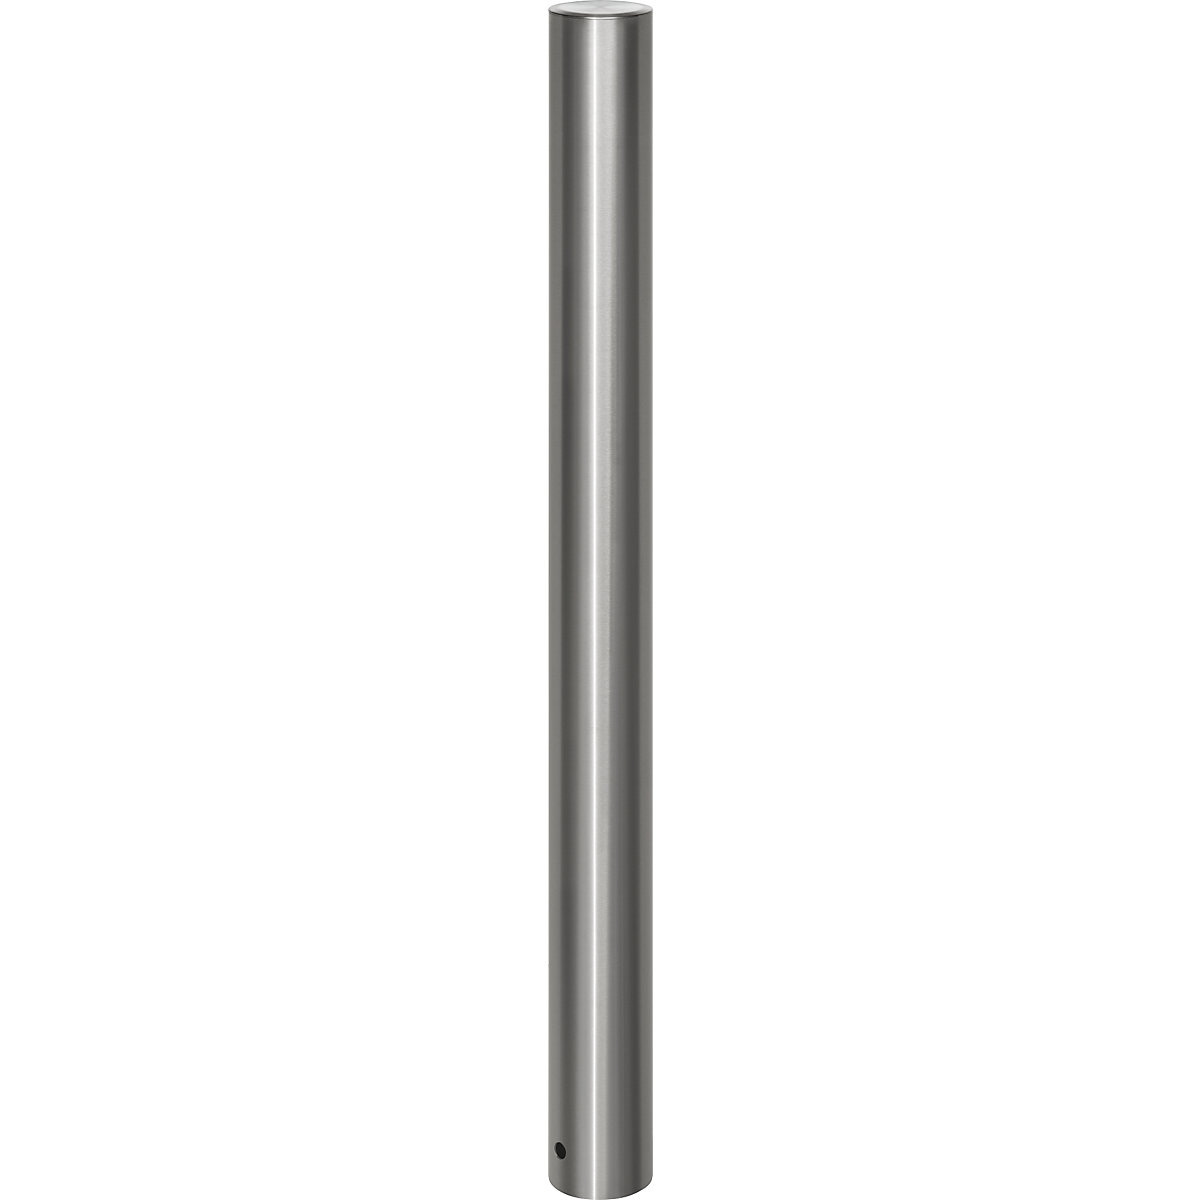 Stainless steel barrier post, with flat head, ground sleeve for concreting in, Ø 102 mm-8